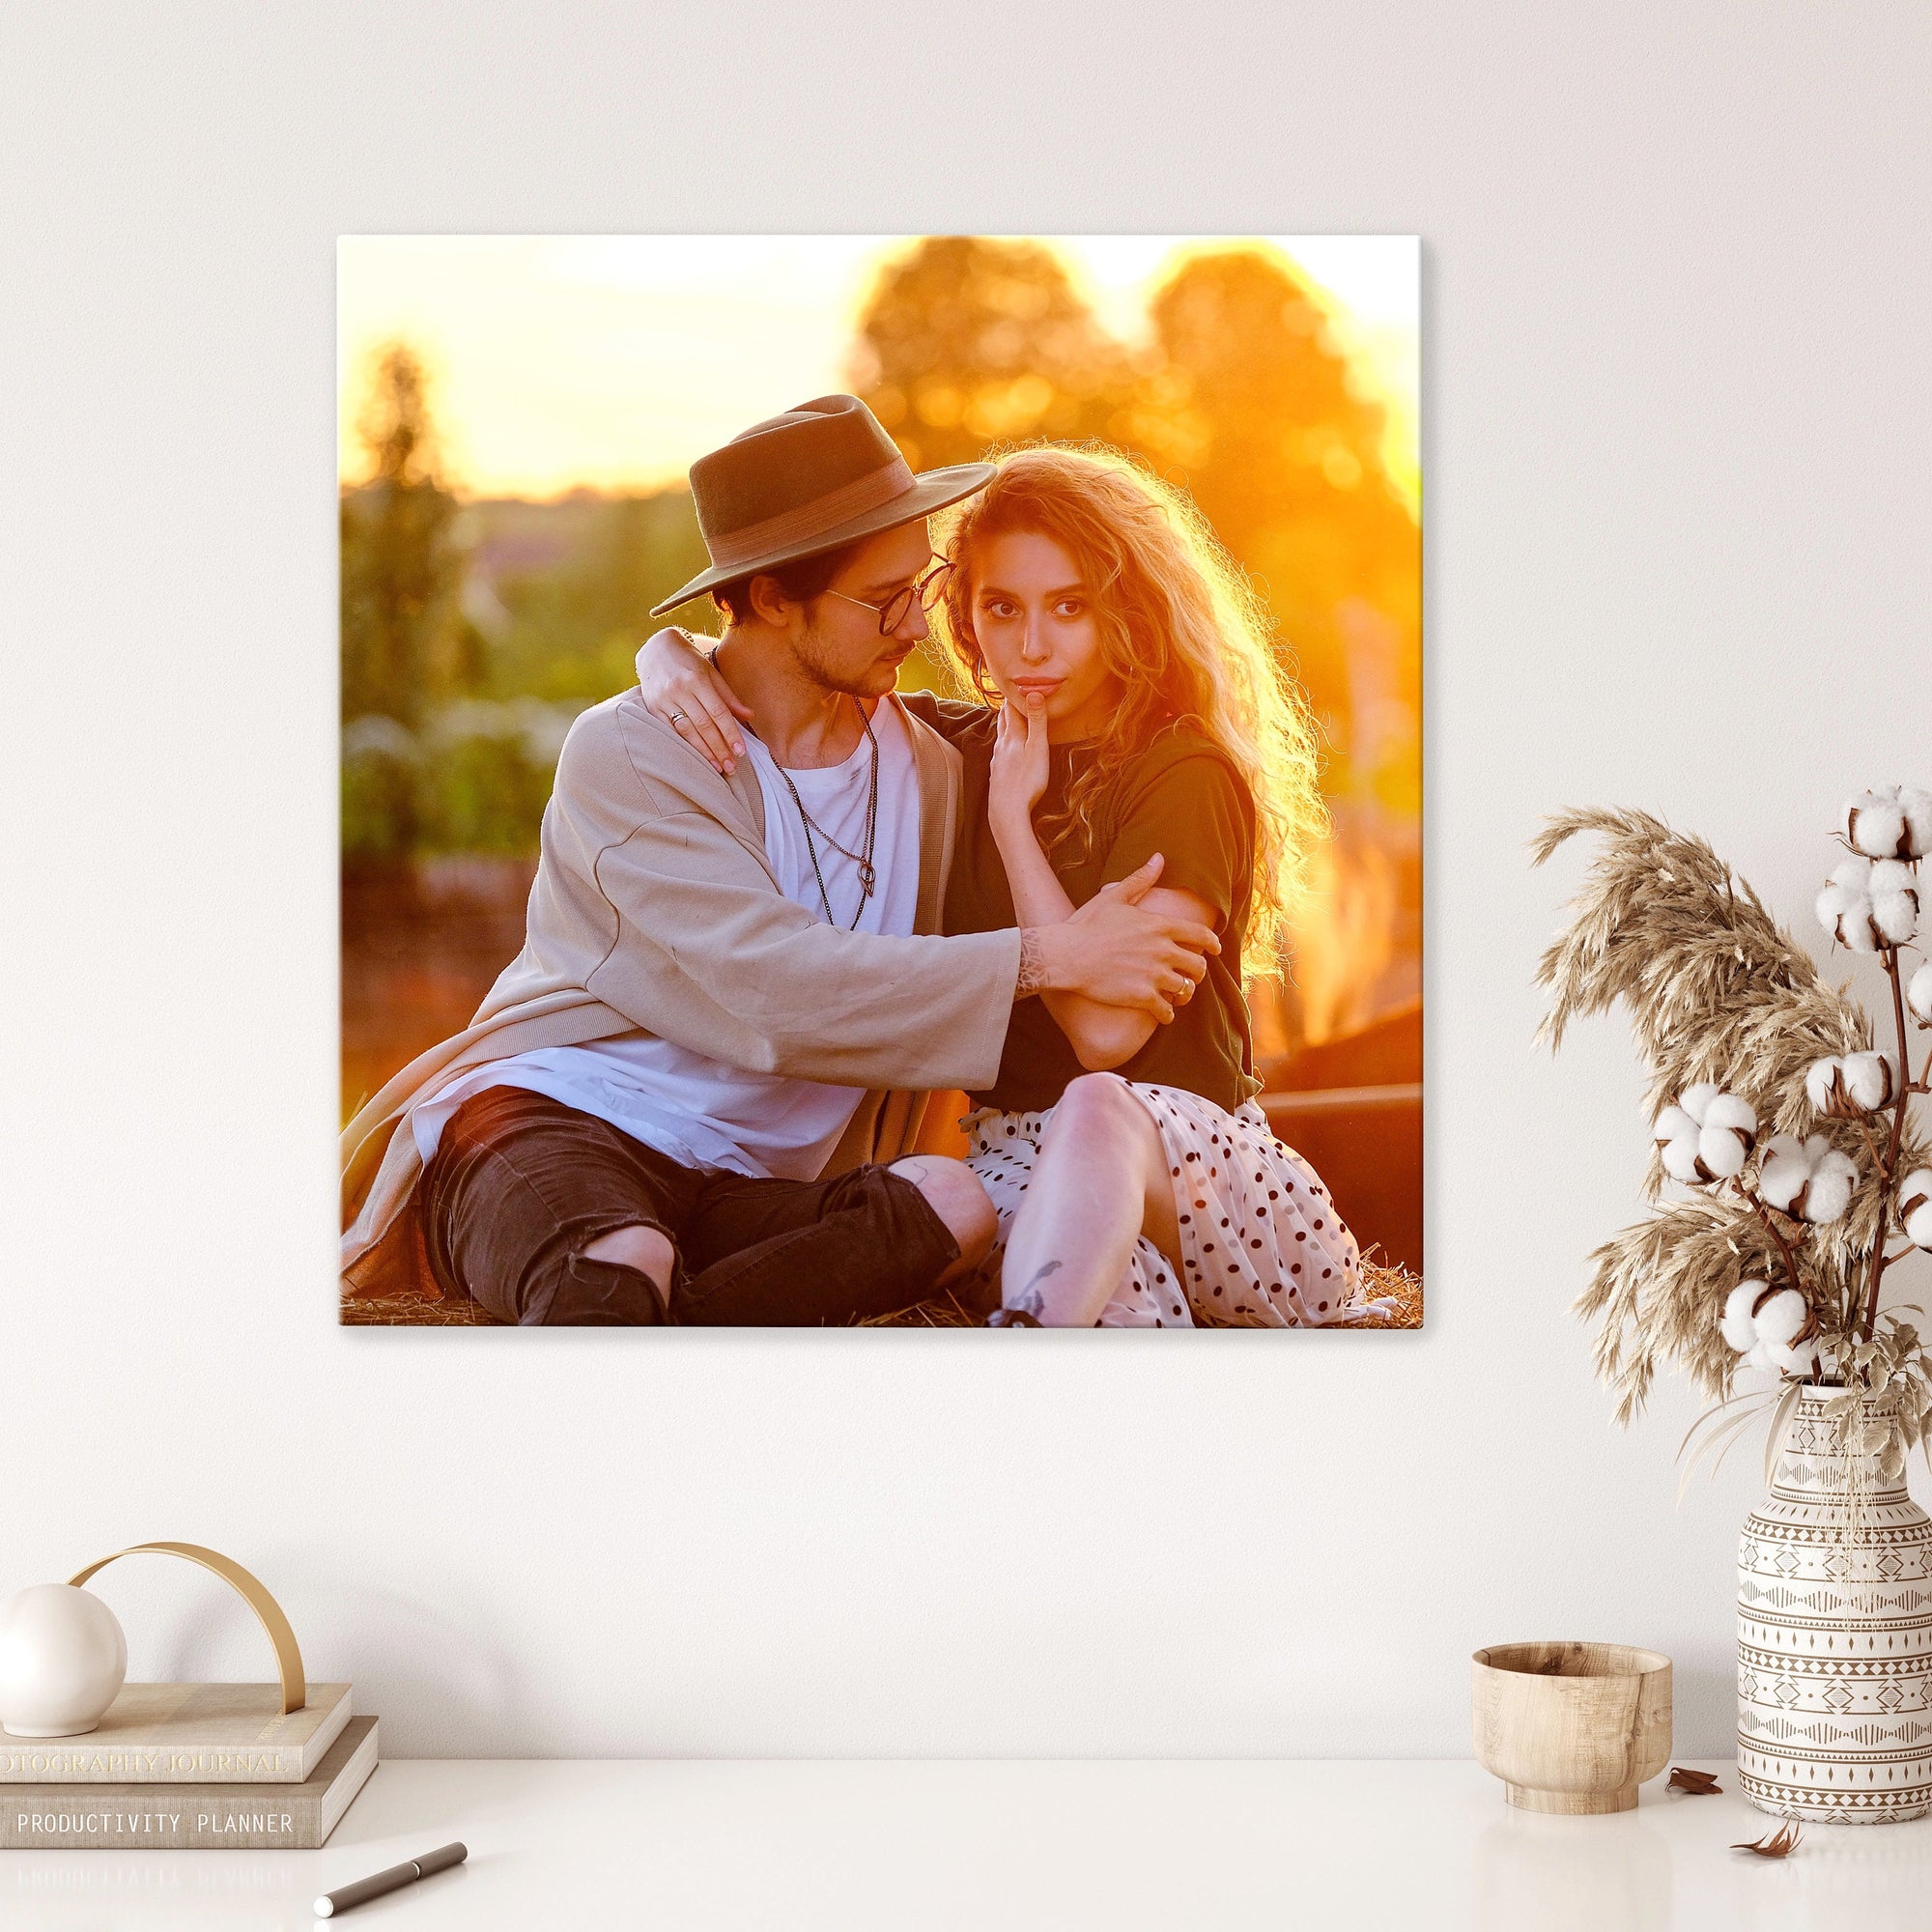 Customized Rolled Canvas Prints